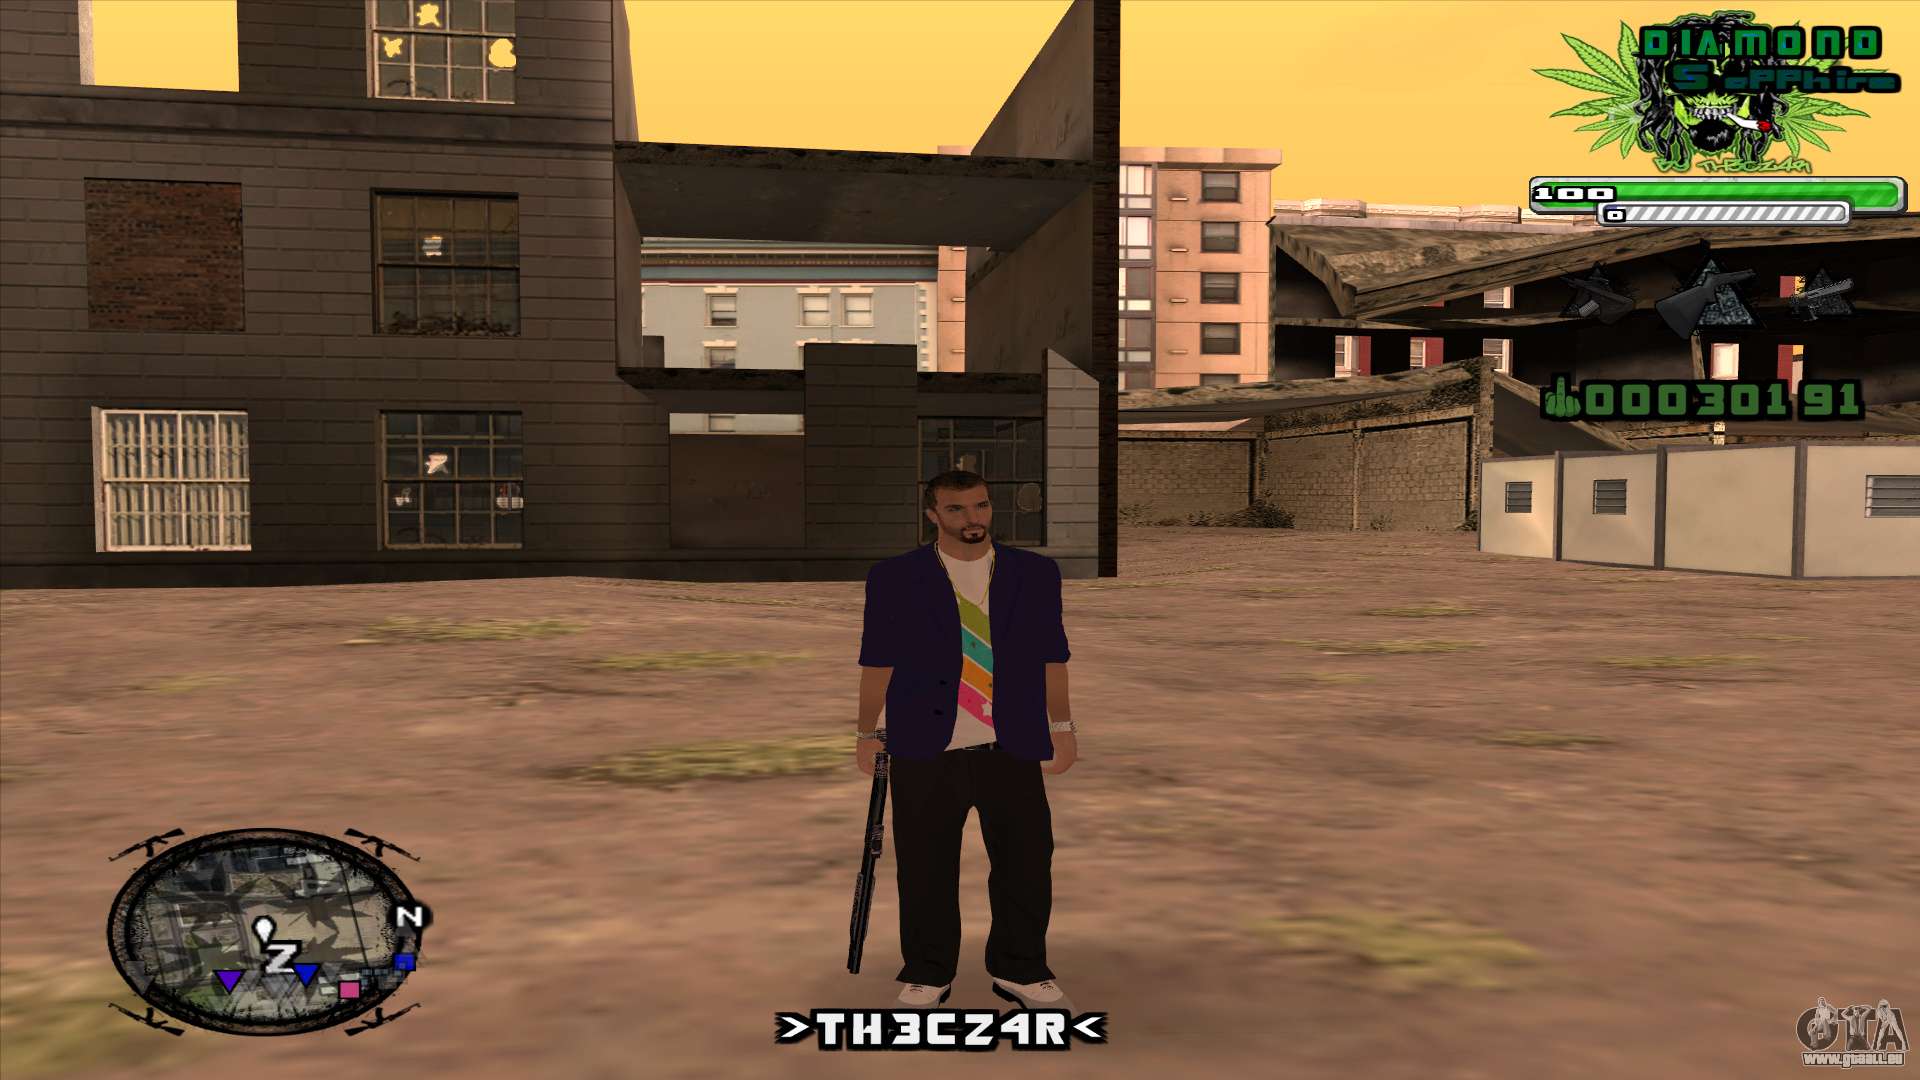 Download GTA Vice City for PC with full setup and Zip File